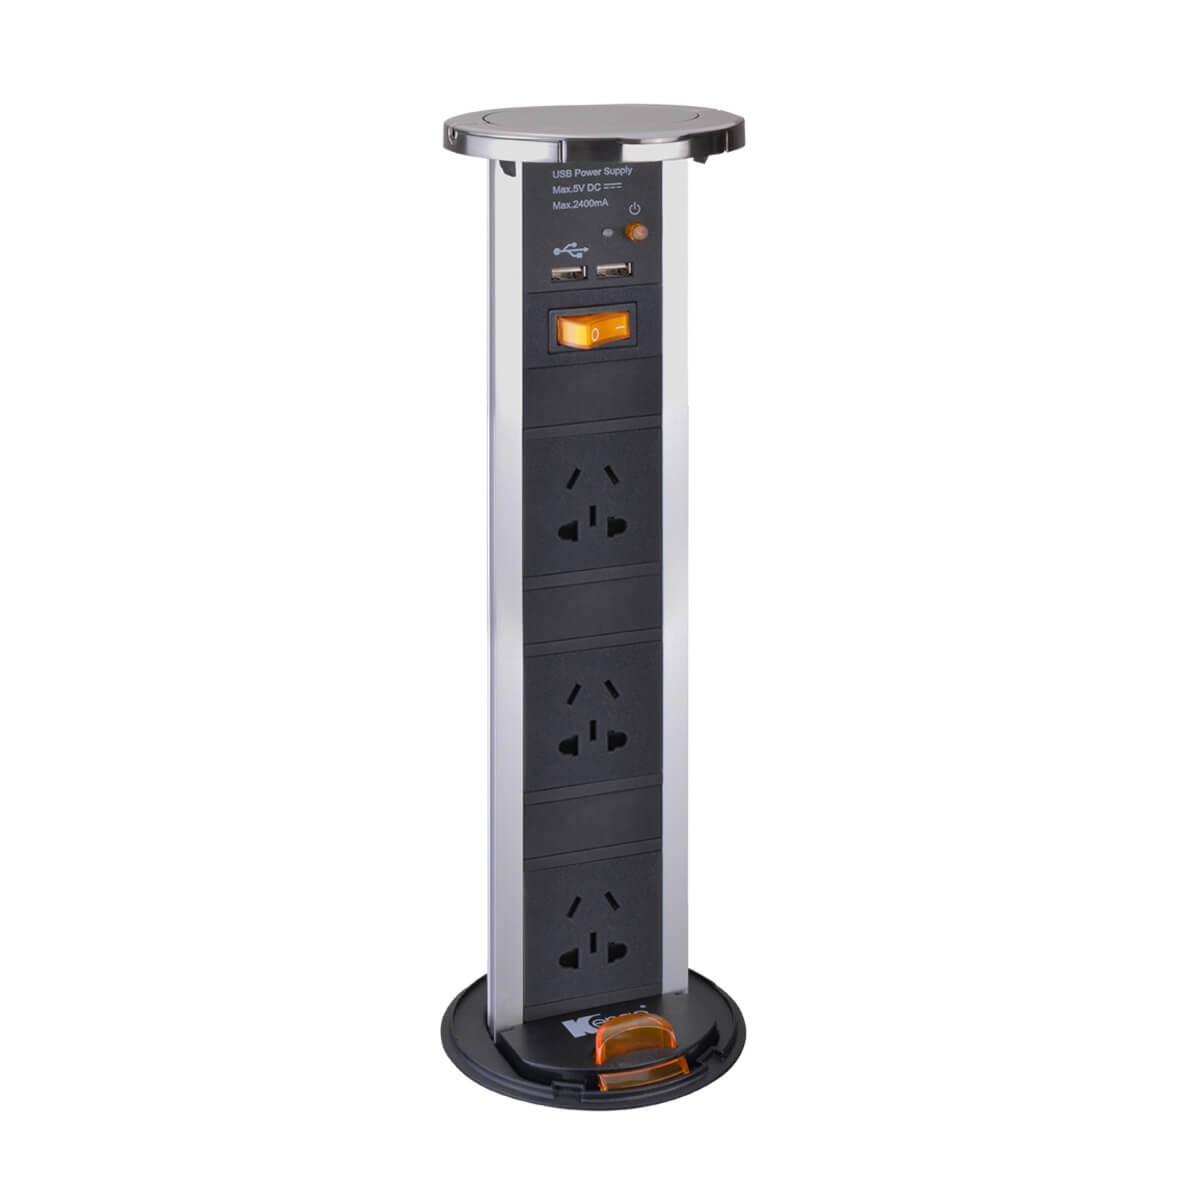 POP-UP SOCKET with CCC Socket and USB Charger Port – Satin nickel